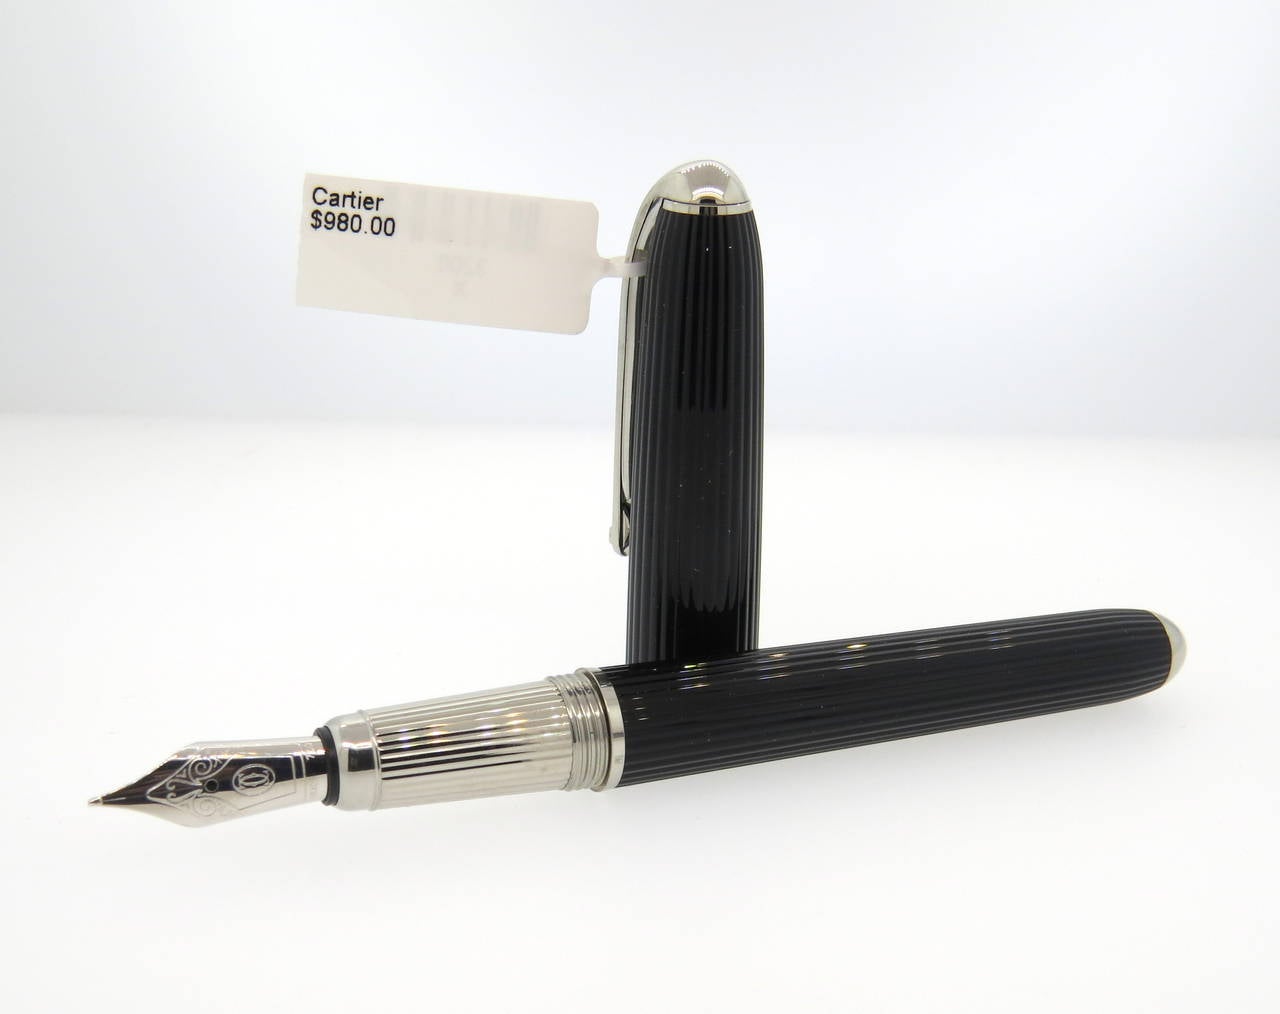 Beautiful Cartier fluted black composite fountain pen featuring platinum plated finishes and an 18K gold nib. Pen measures 145mm long. Pen is a brand new in store sample, comes with original box, booklets and cartridges. Pen retails for $980.